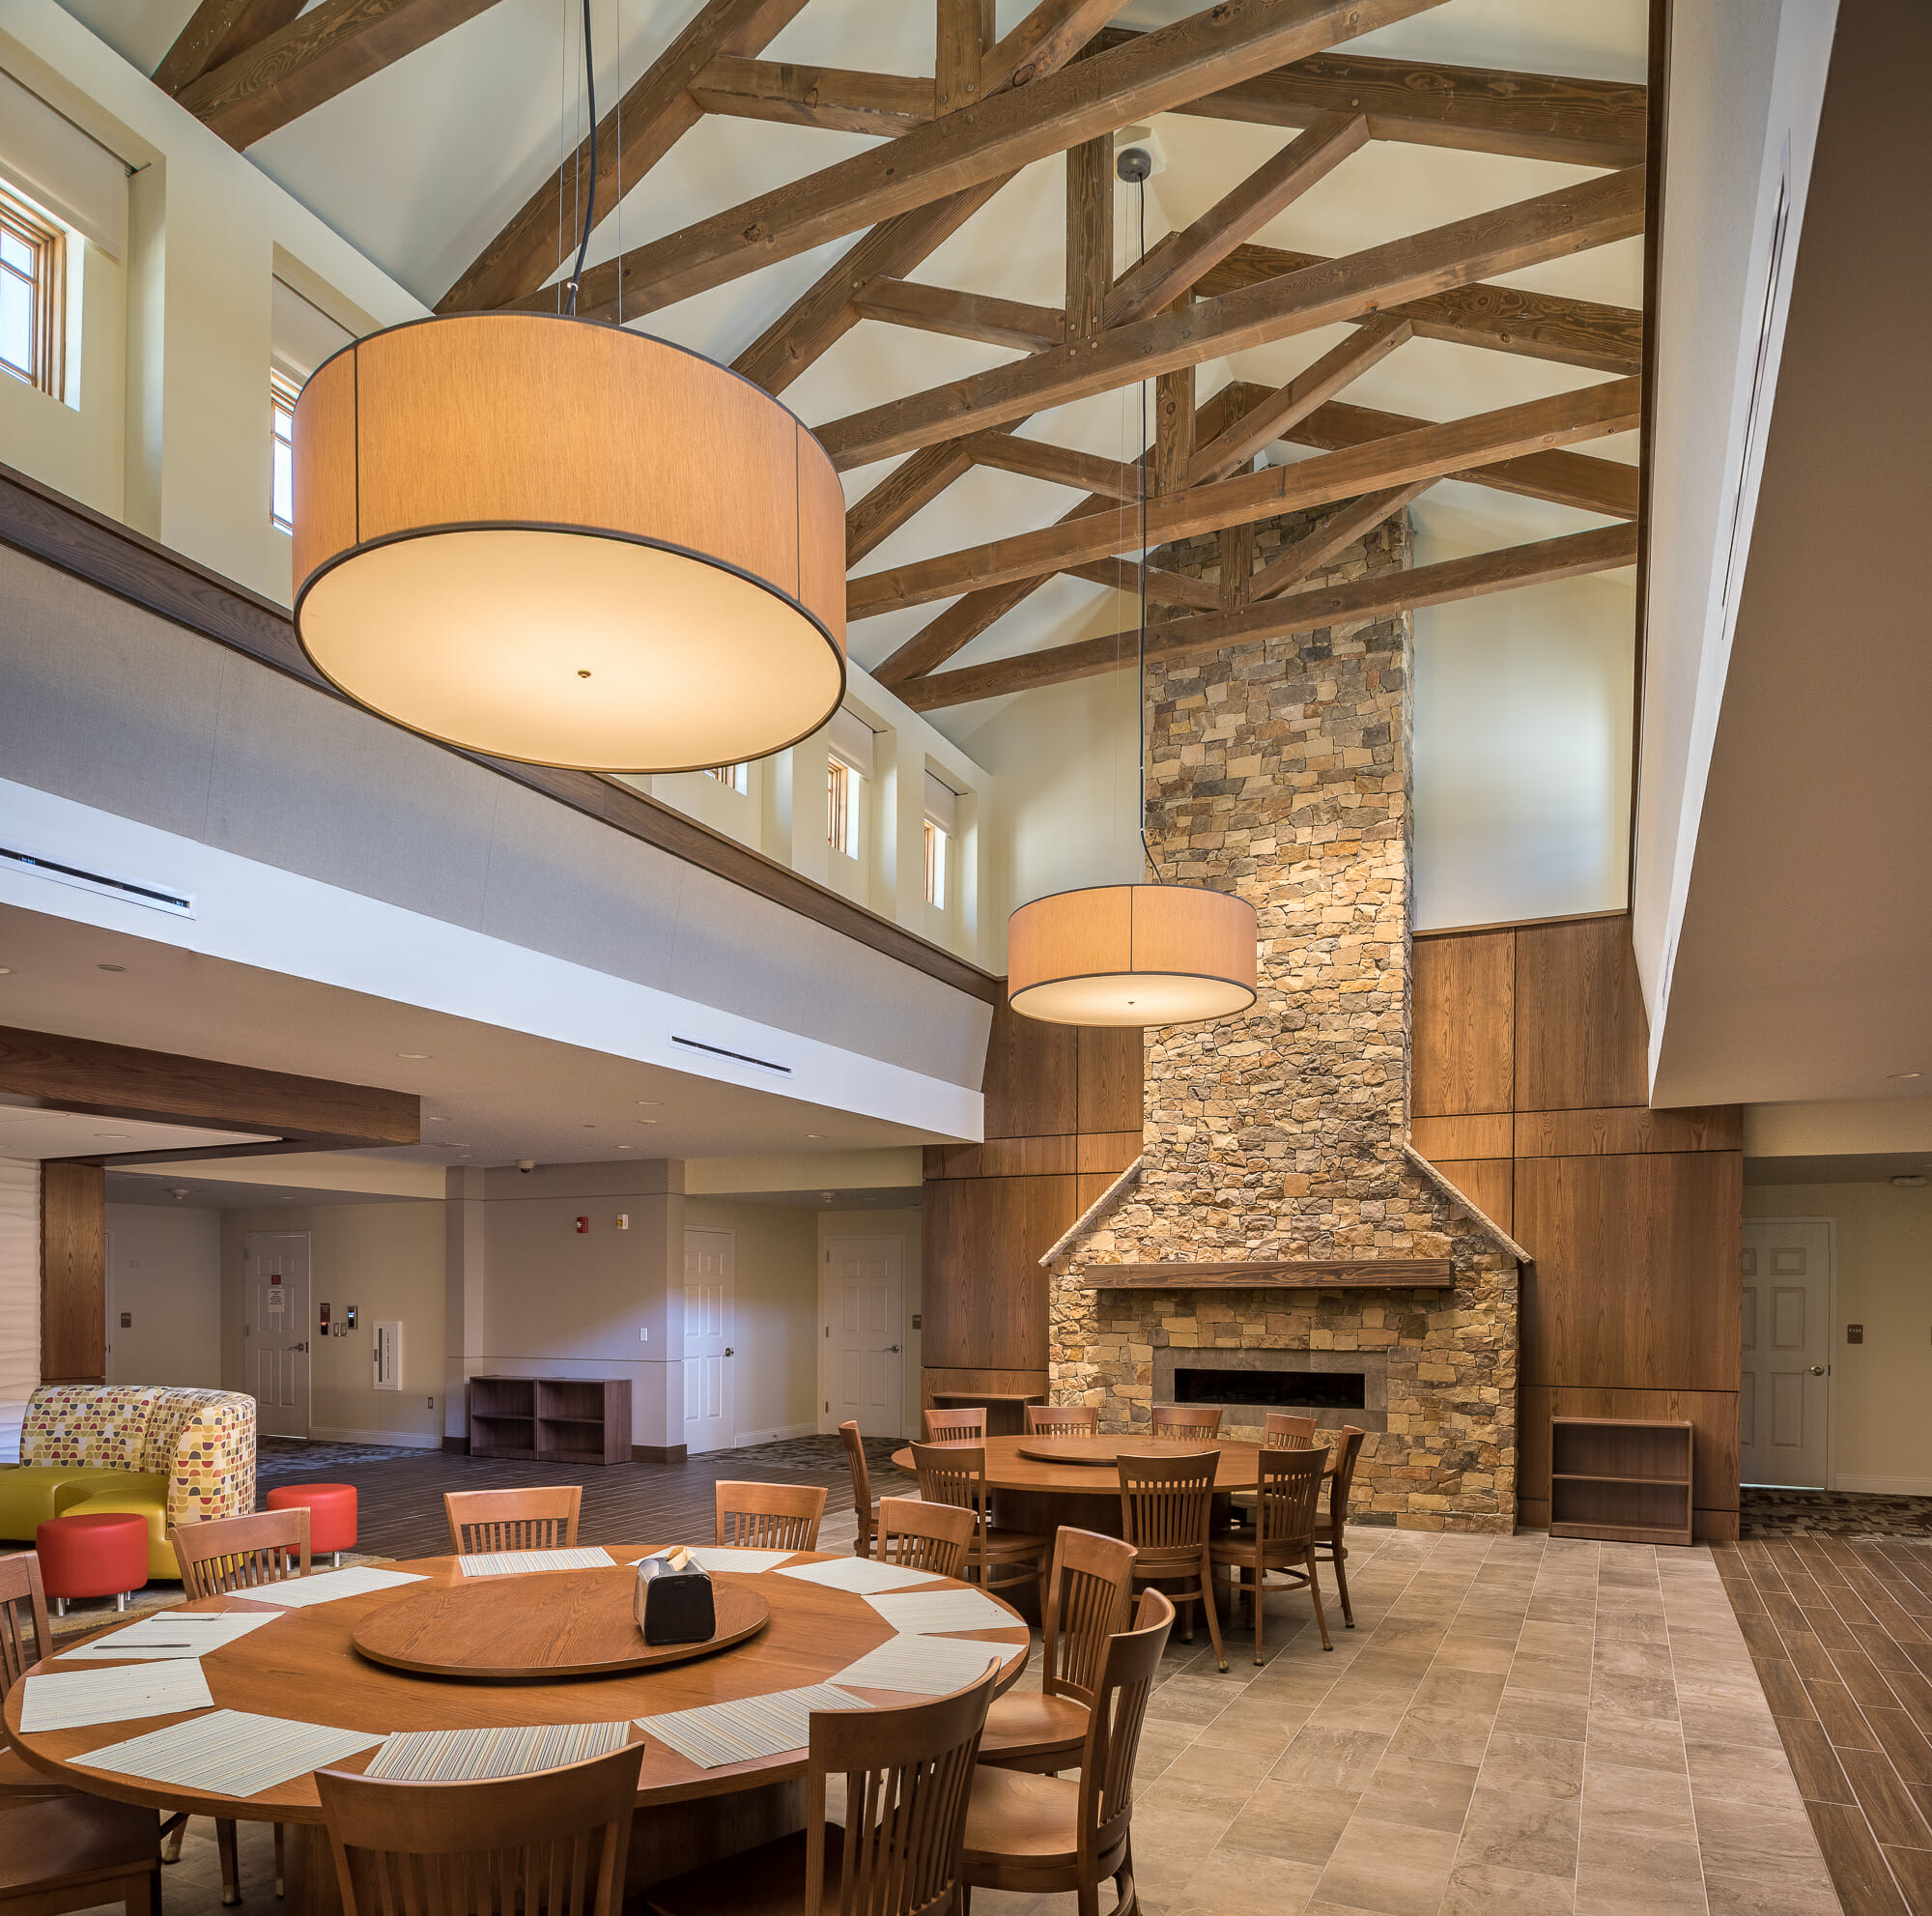 The King Post Trusses in the Christina Seix Academy in Trenton, NJ were made with Kiln-dried Douglas fir. The King Post Trusses highlight the cathedral ceiling and tall stone fireplace.